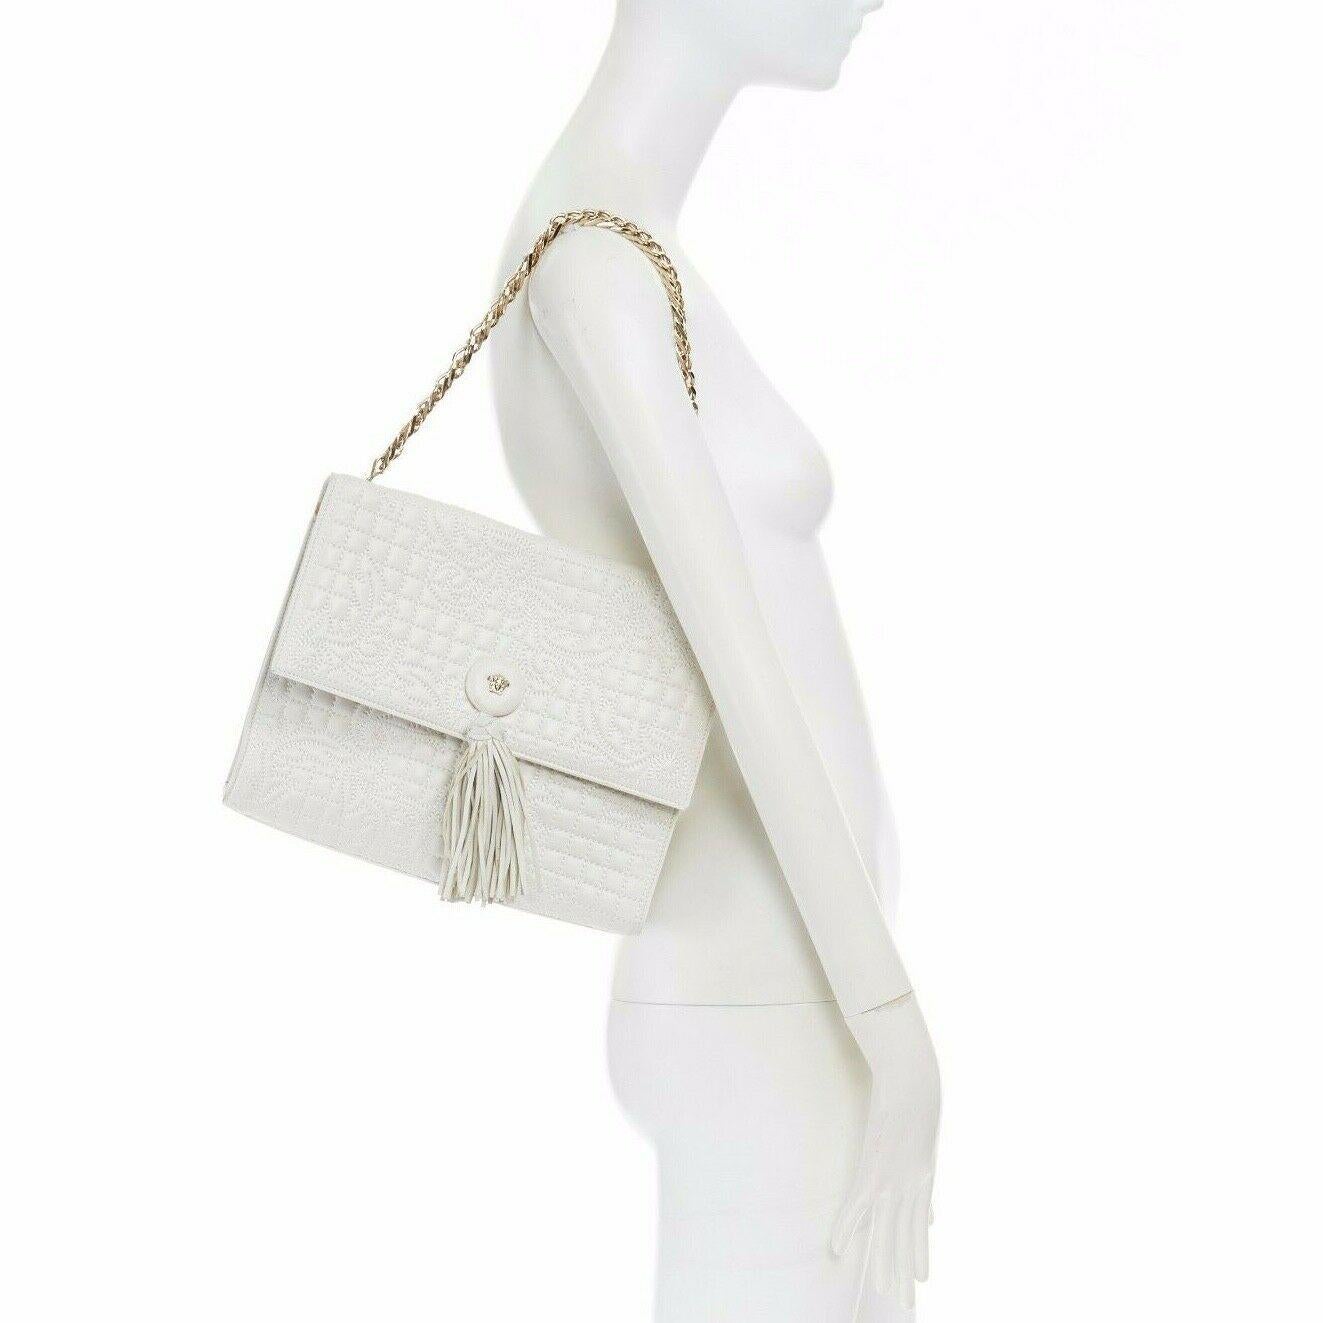 GIANNI VERSACE
Vanitas collection. White nappa leather. Baroque quilted design on leather upper. Medusa head with fringe tassel design at front flap closure. Magnetic closure. Gold-tone metal chain linked shoulder strap. Single wall zip compartment